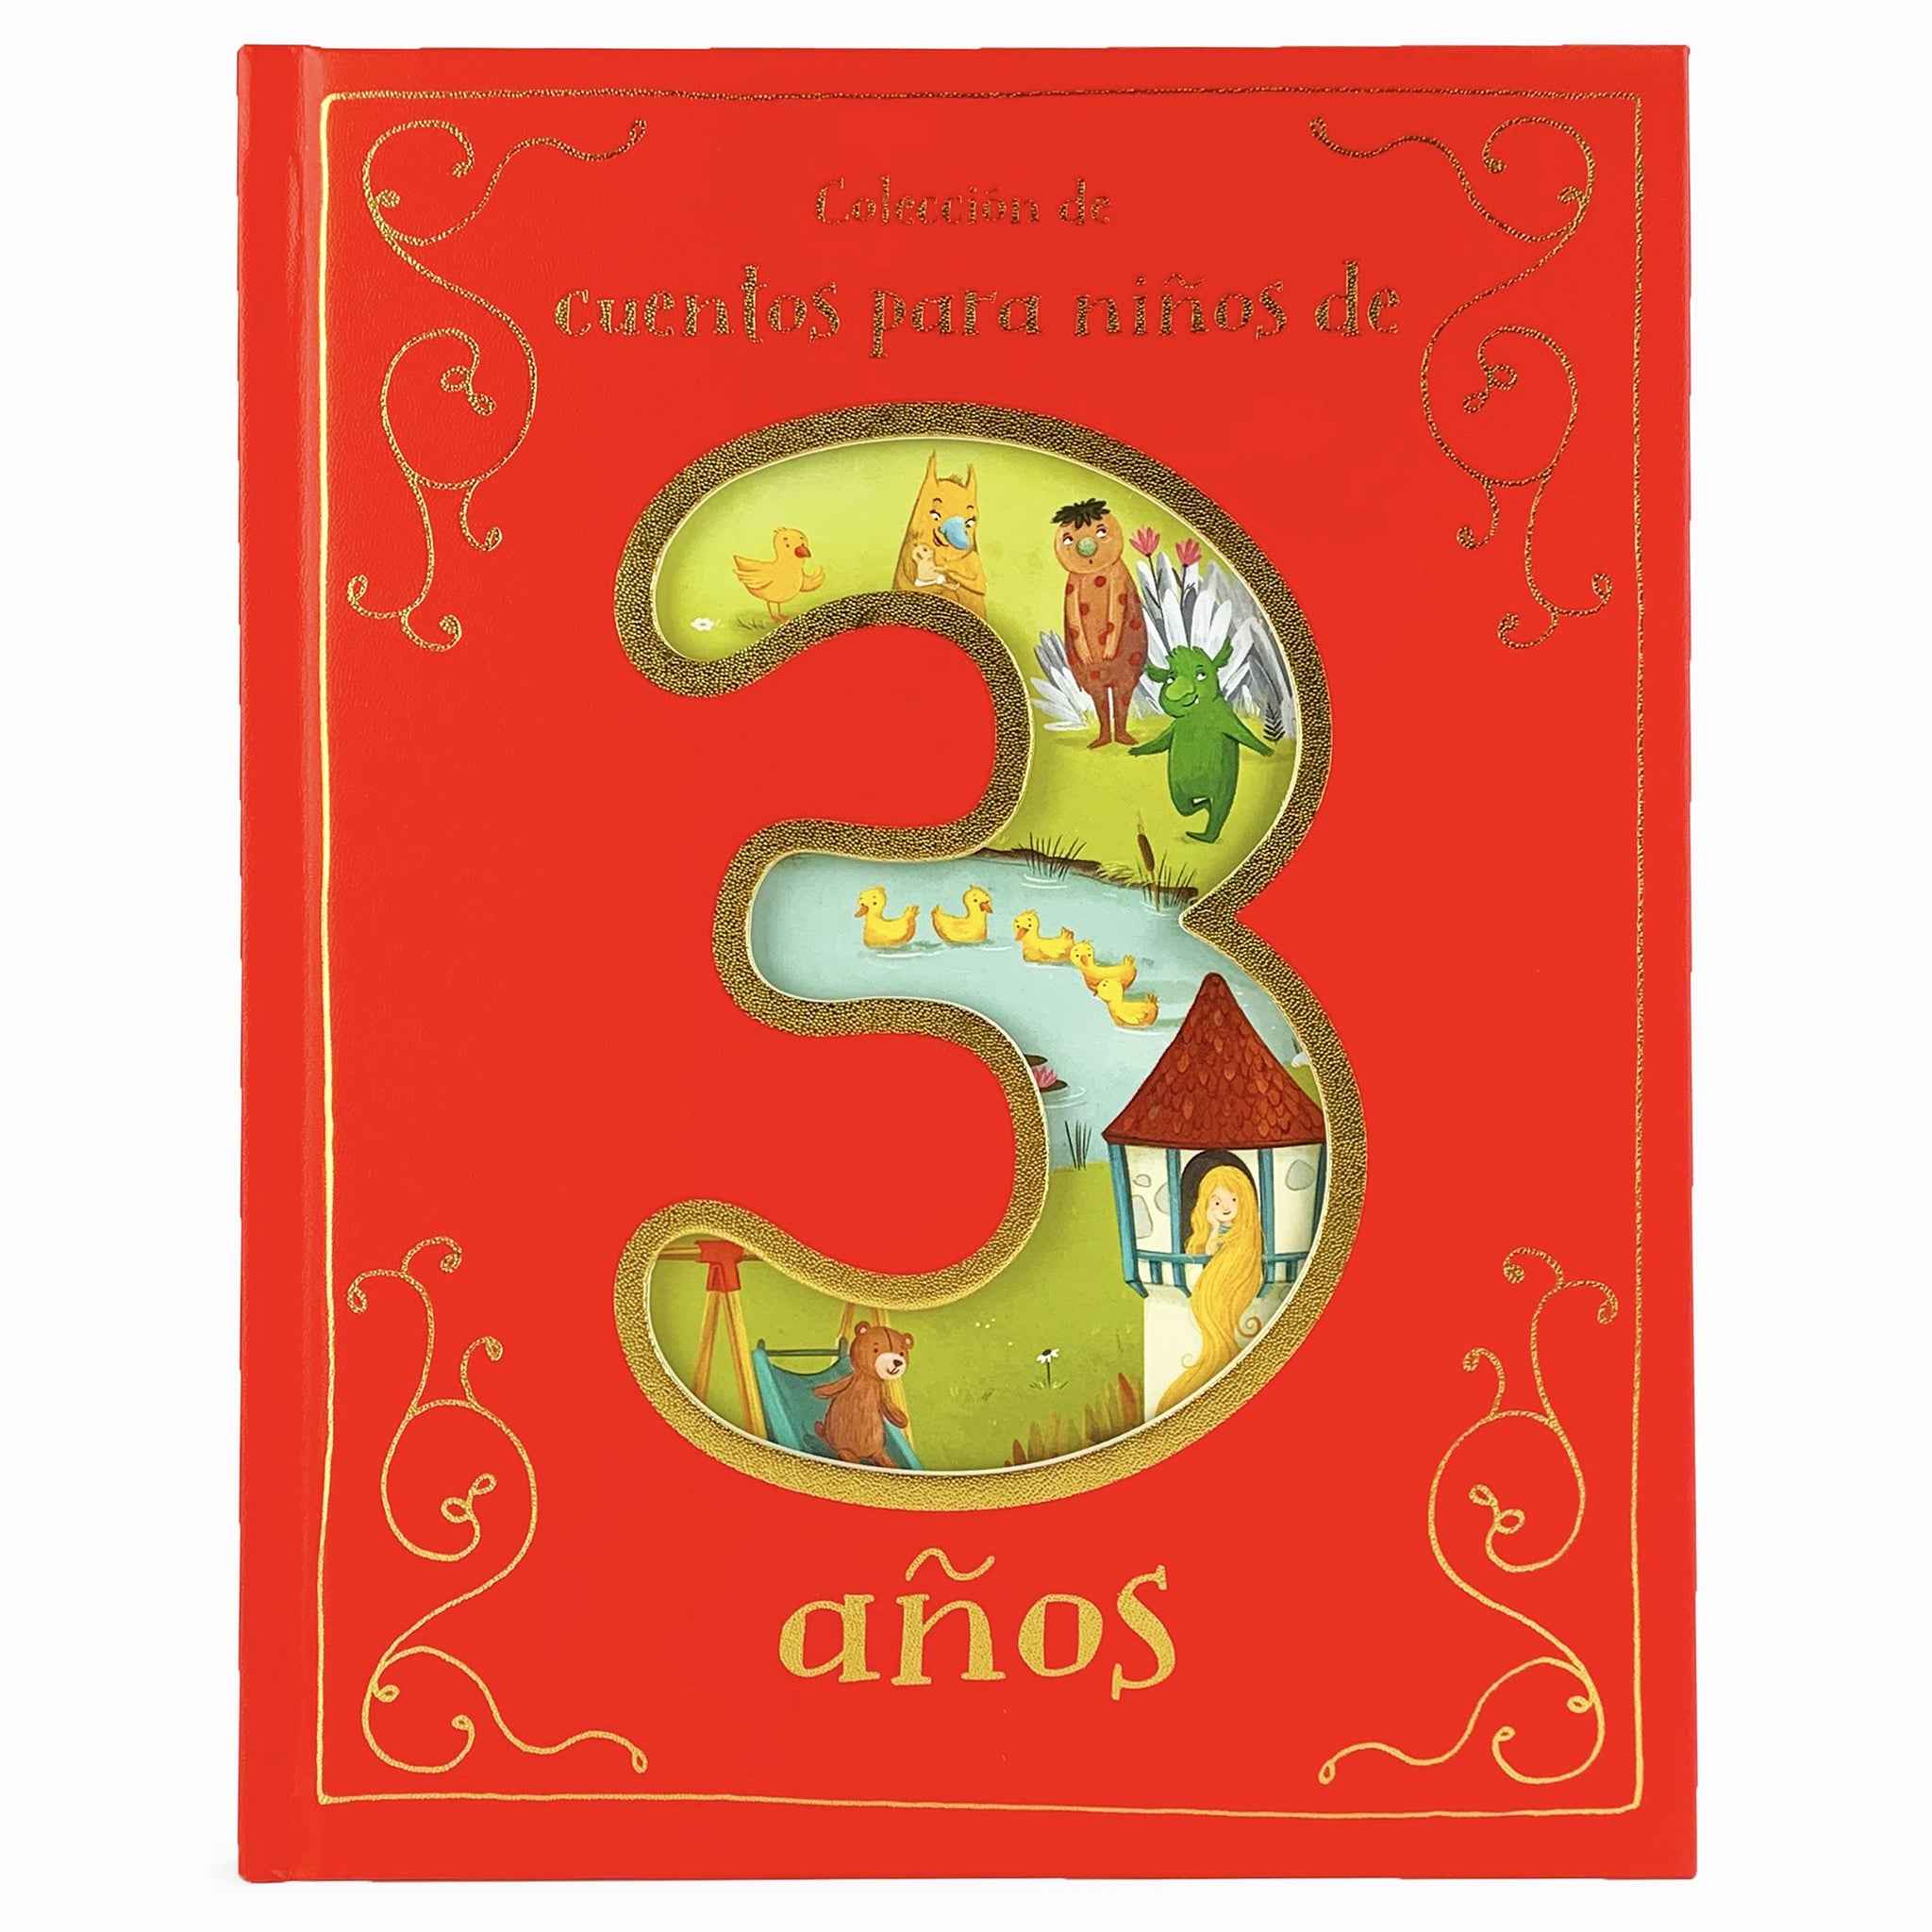  Cuentos infantiles 2 años: Lote de 3 libros para regalar a  niños de 2 años (Cuentos infantiles para niños) - 3 books in Spanish for 2  year-olds: 9788417210946: Kukhtina, Margarita: Books